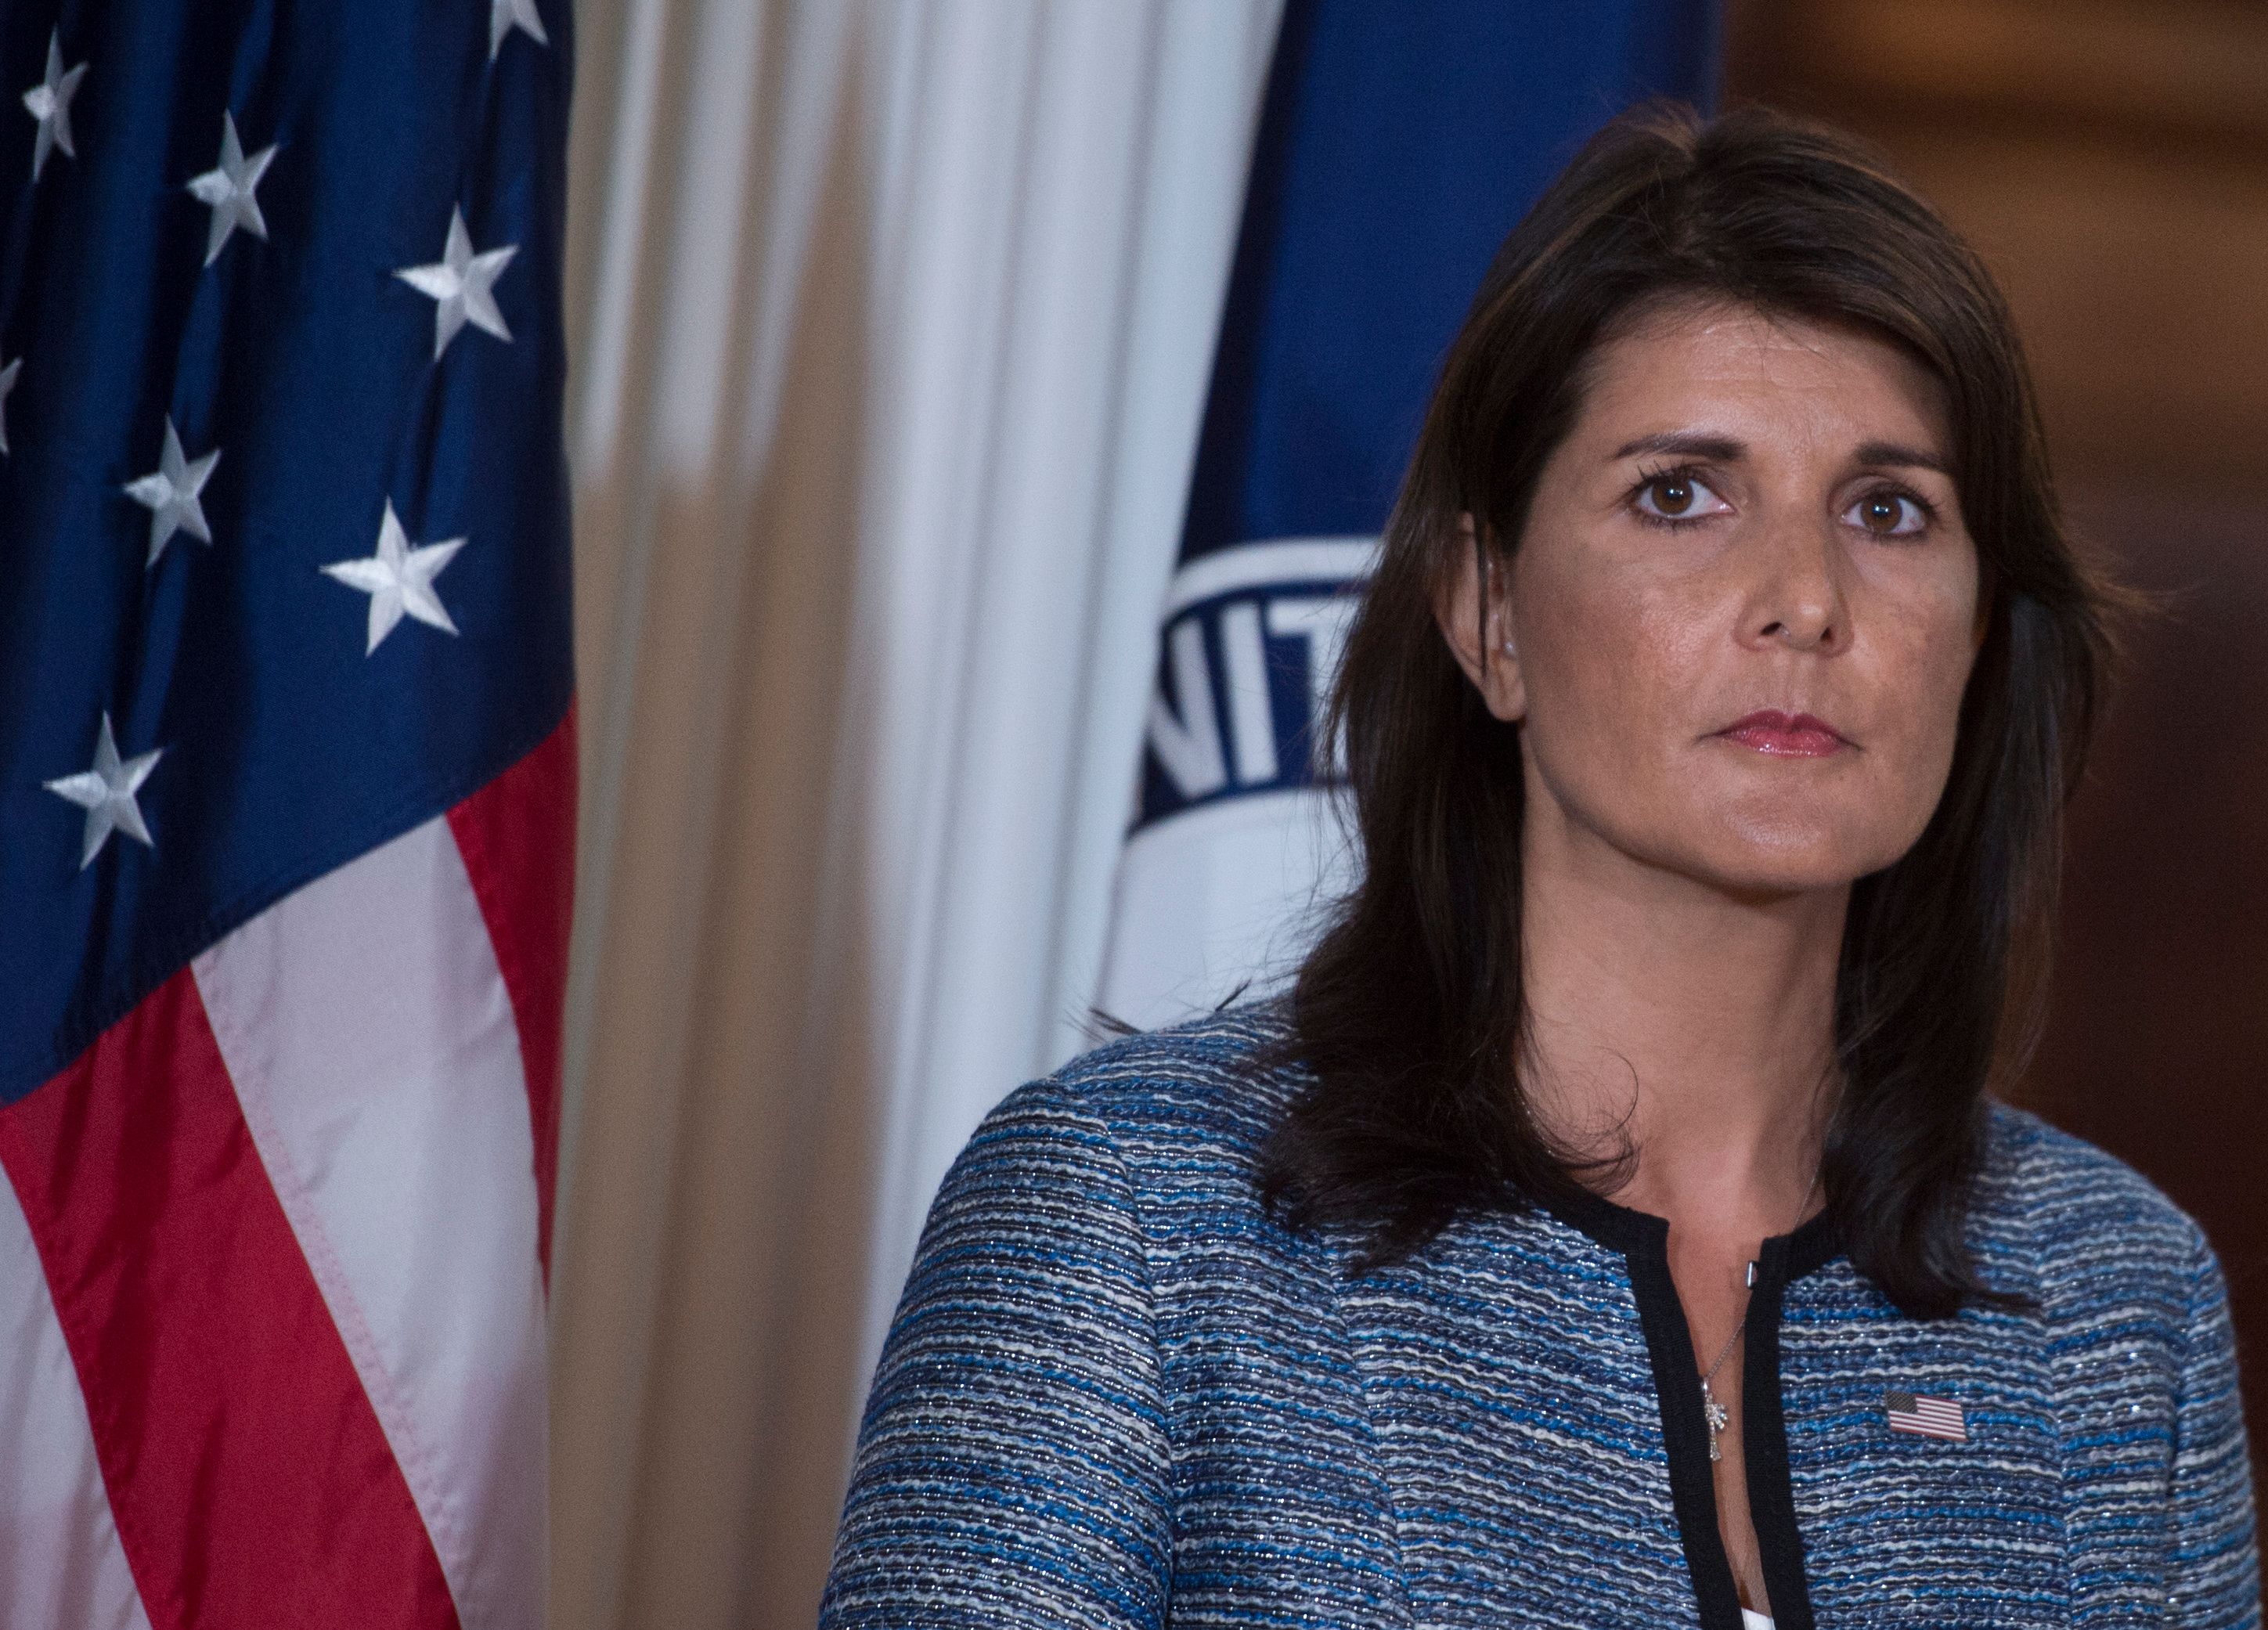 US Ambassador to the United Nation Nikki Haley speaks at the US Department of State in Washington DC on June 19, 2018. The United States announced that it is withdrawing from the U.N. Human Rights Council. (Andrew Caballero-Reynolds—AFP/Getty Images)